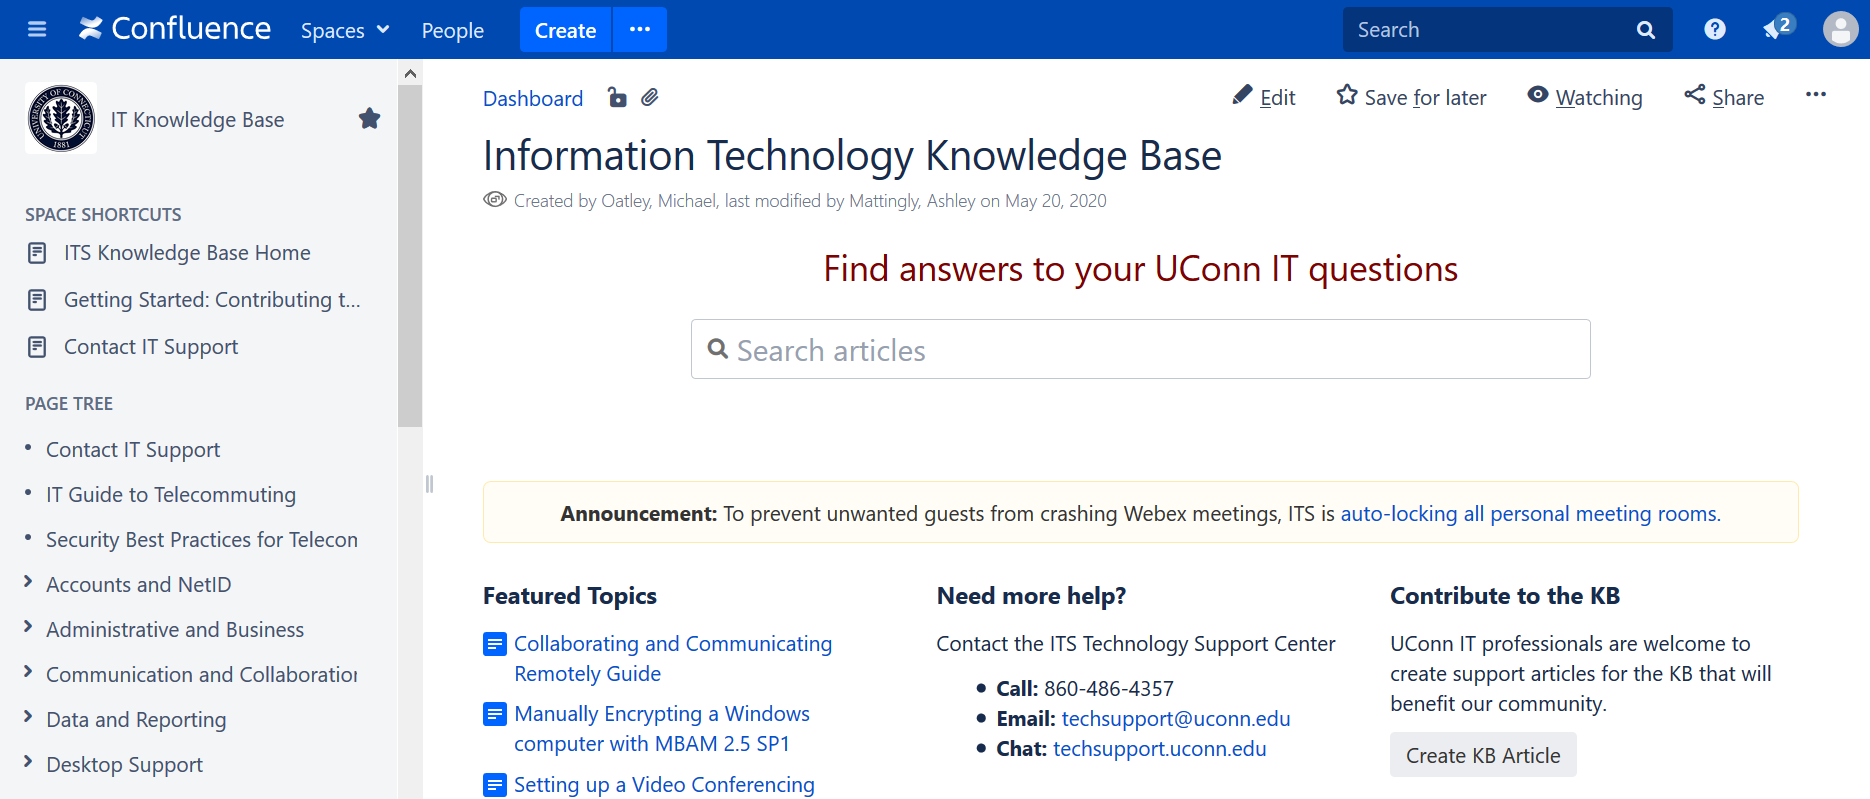 7 Best Knowledge Base Software in 2020